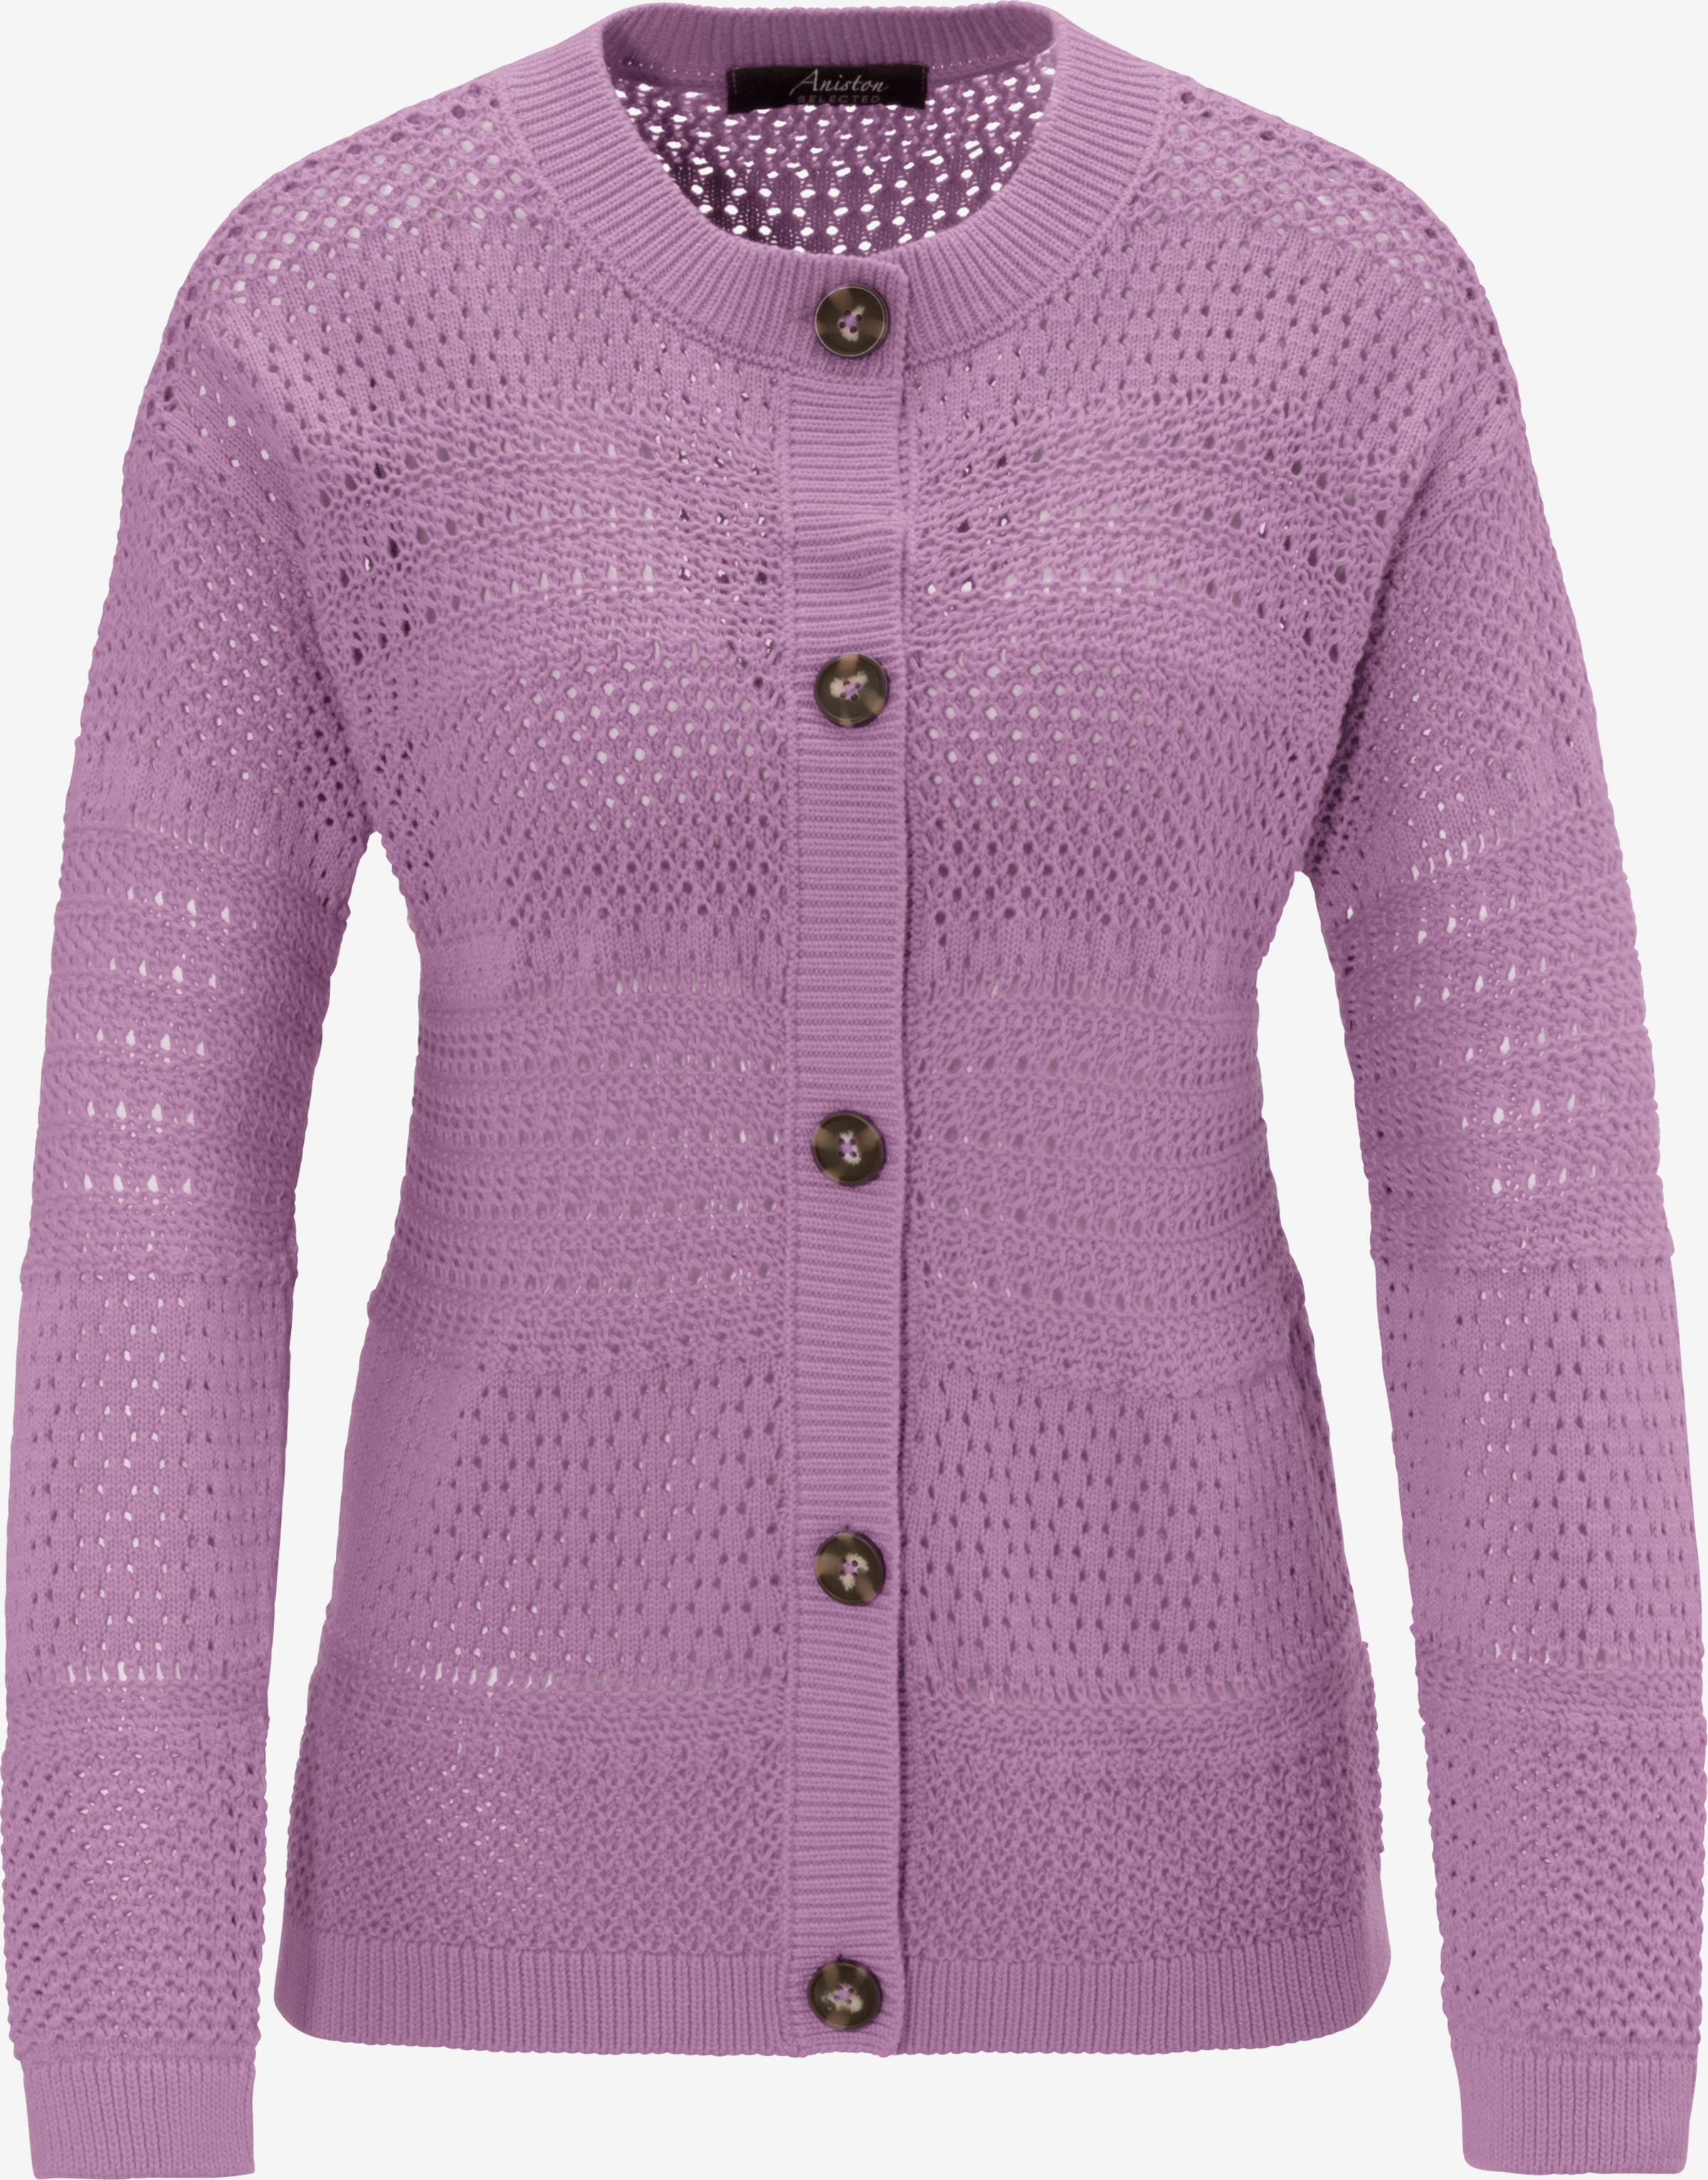 Aniston Strickjacke YOU ABOUT in Lila | SELECTED